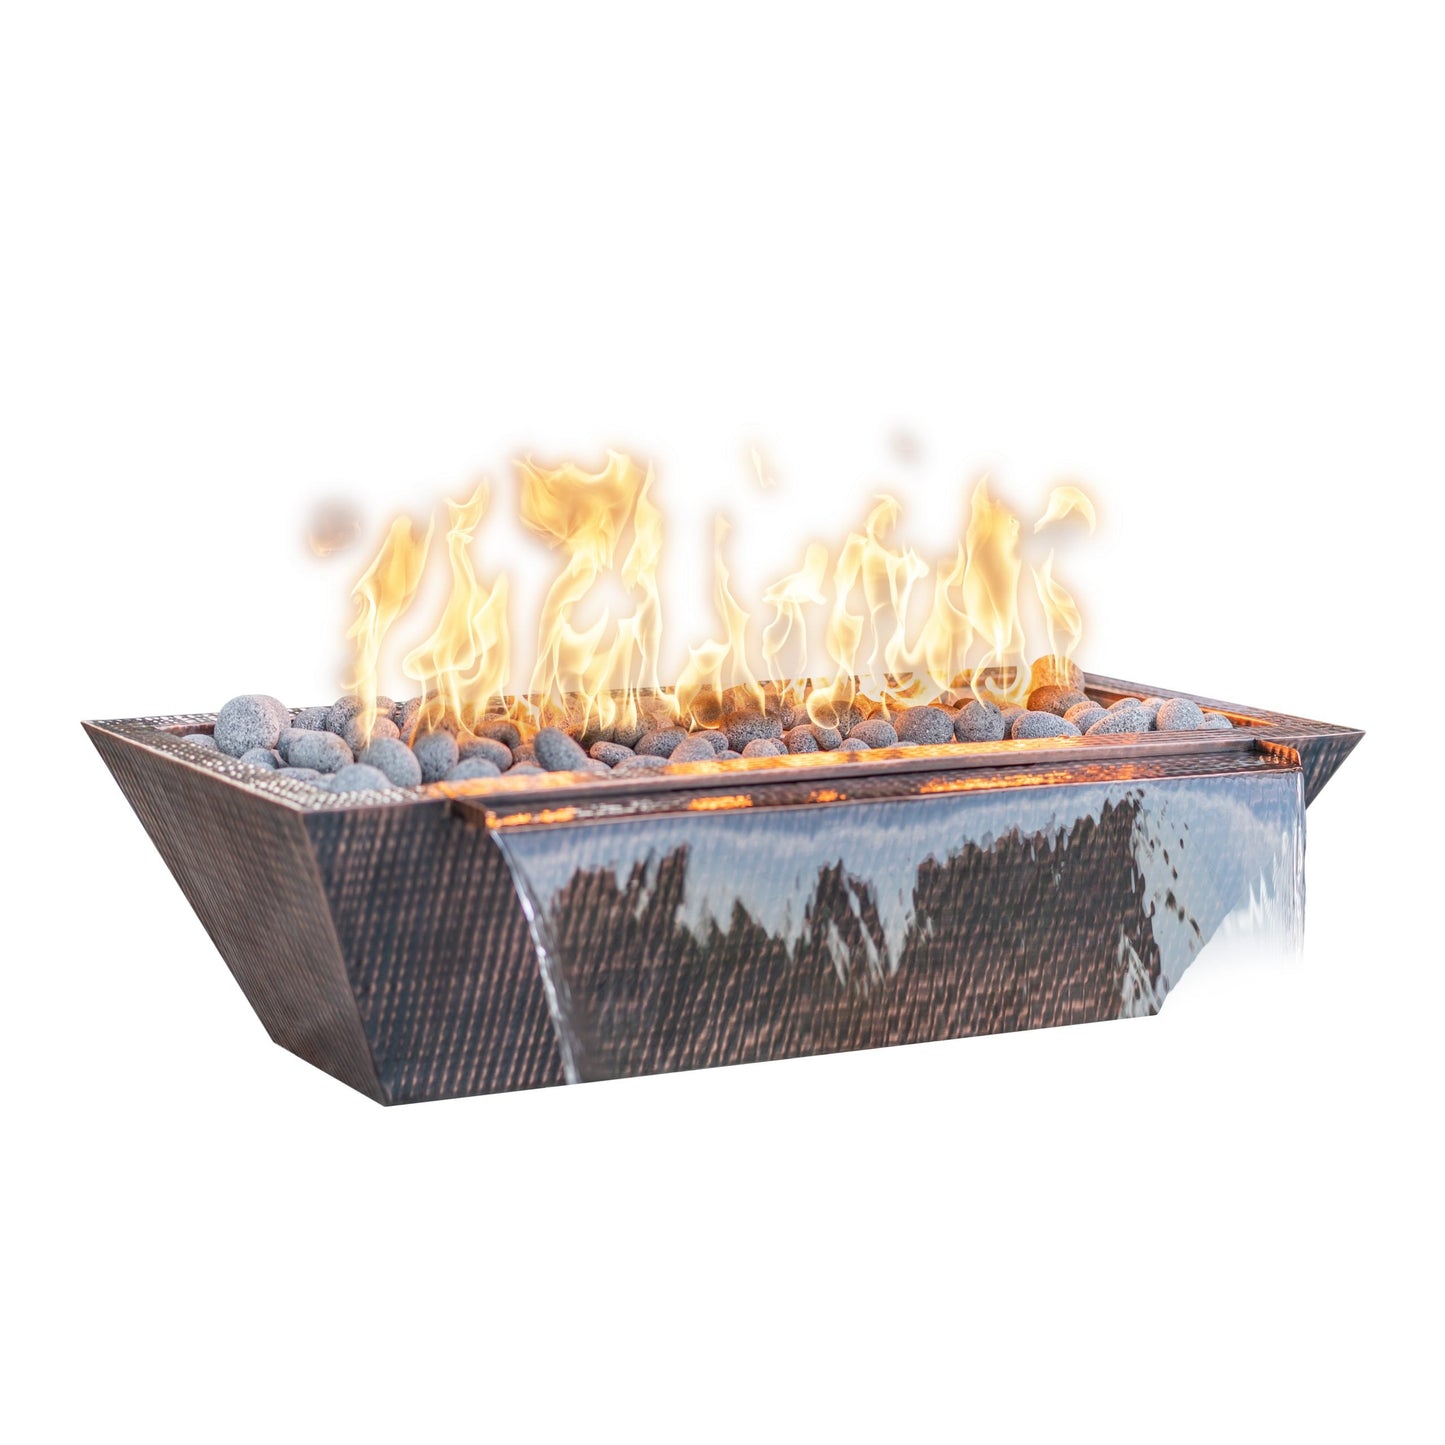 The Outdoor Plus Linear Maya 72" Stainless Steel Liquid Propane Fire & Water Bowl with Match Lit Ignition